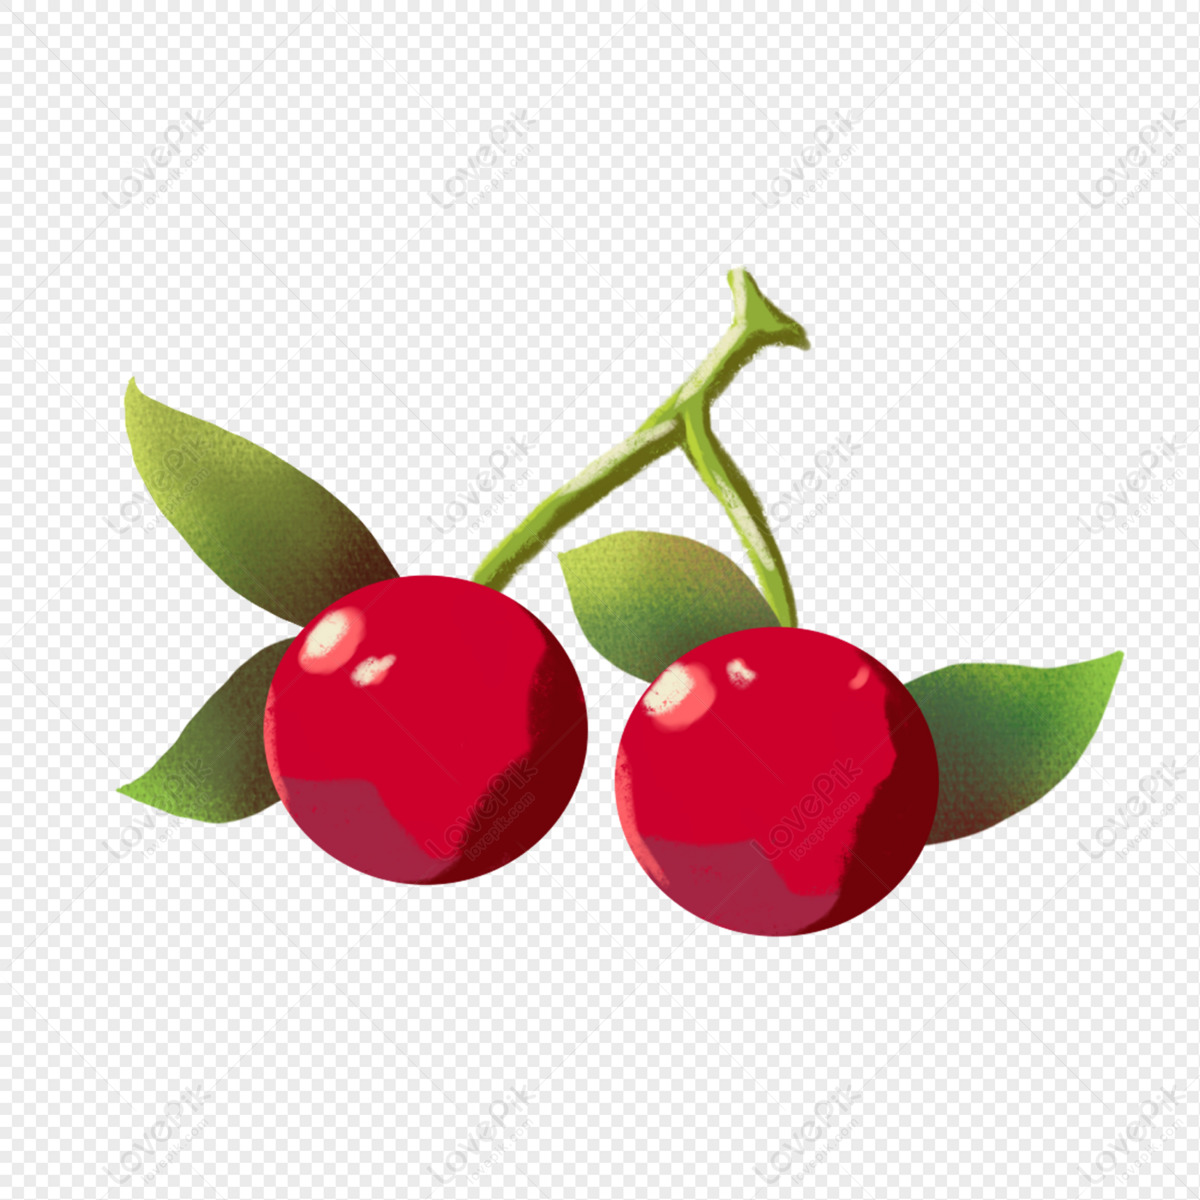 Hand Drawn Cartoon Fruit Cherry Free PNG And Clipart Image For Free  Download - Lovepik | 401379899